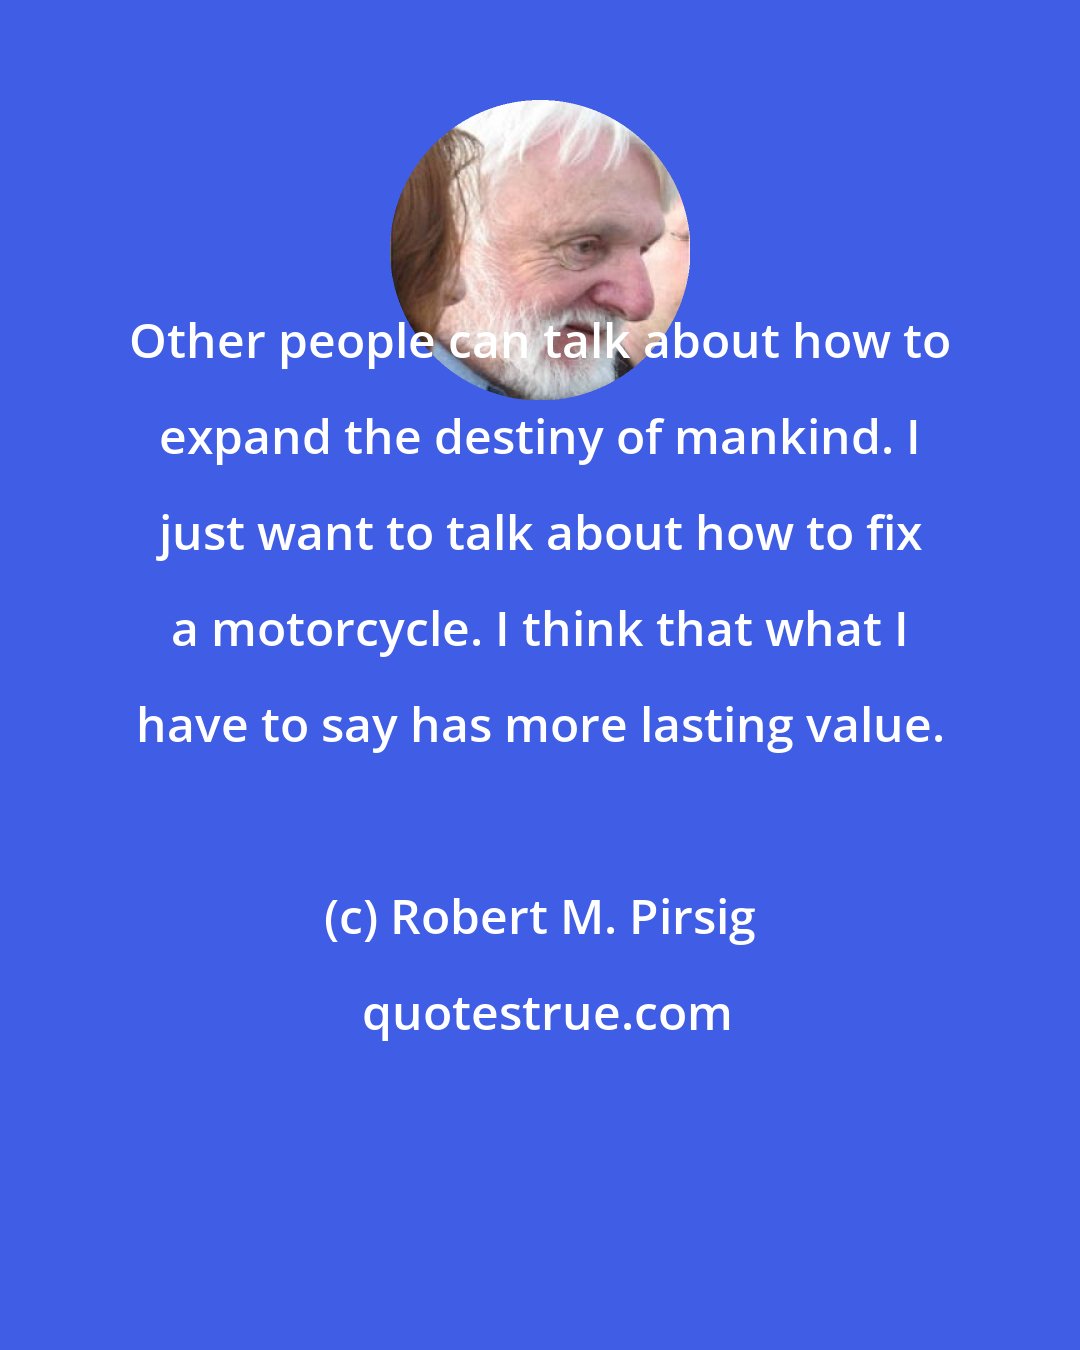 Robert M. Pirsig: Other people can talk about how to expand the destiny of mankind. I just want to talk about how to fix a motorcycle. I think that what I have to say has more lasting value.